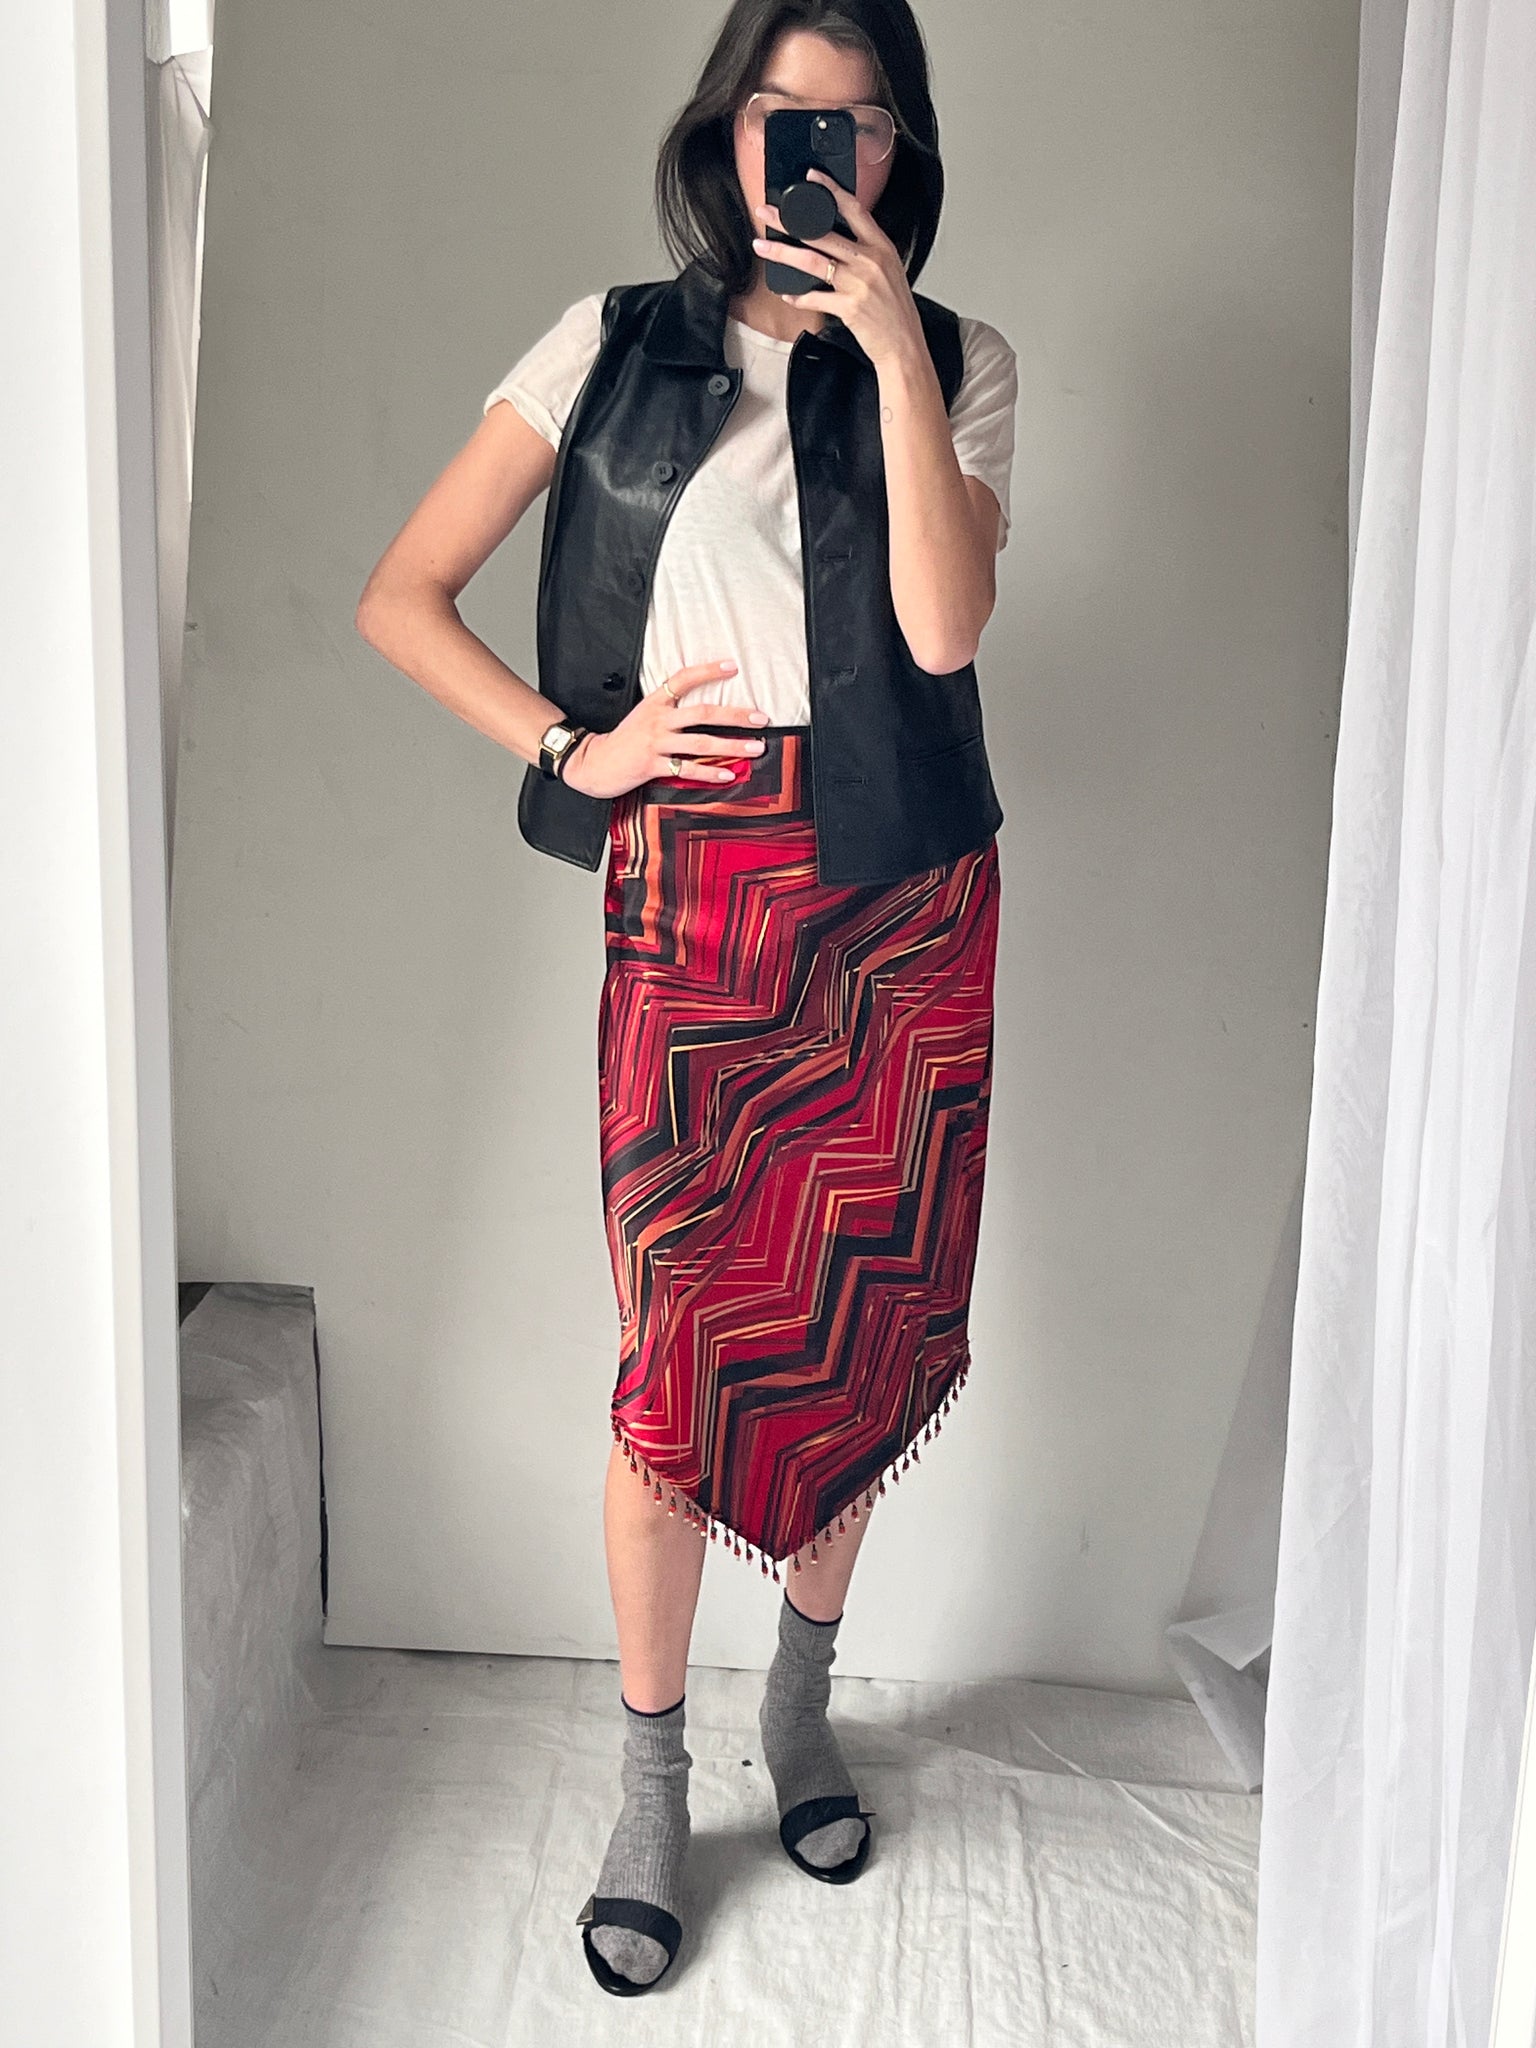 Red & Black Geometric Skirt with Beads